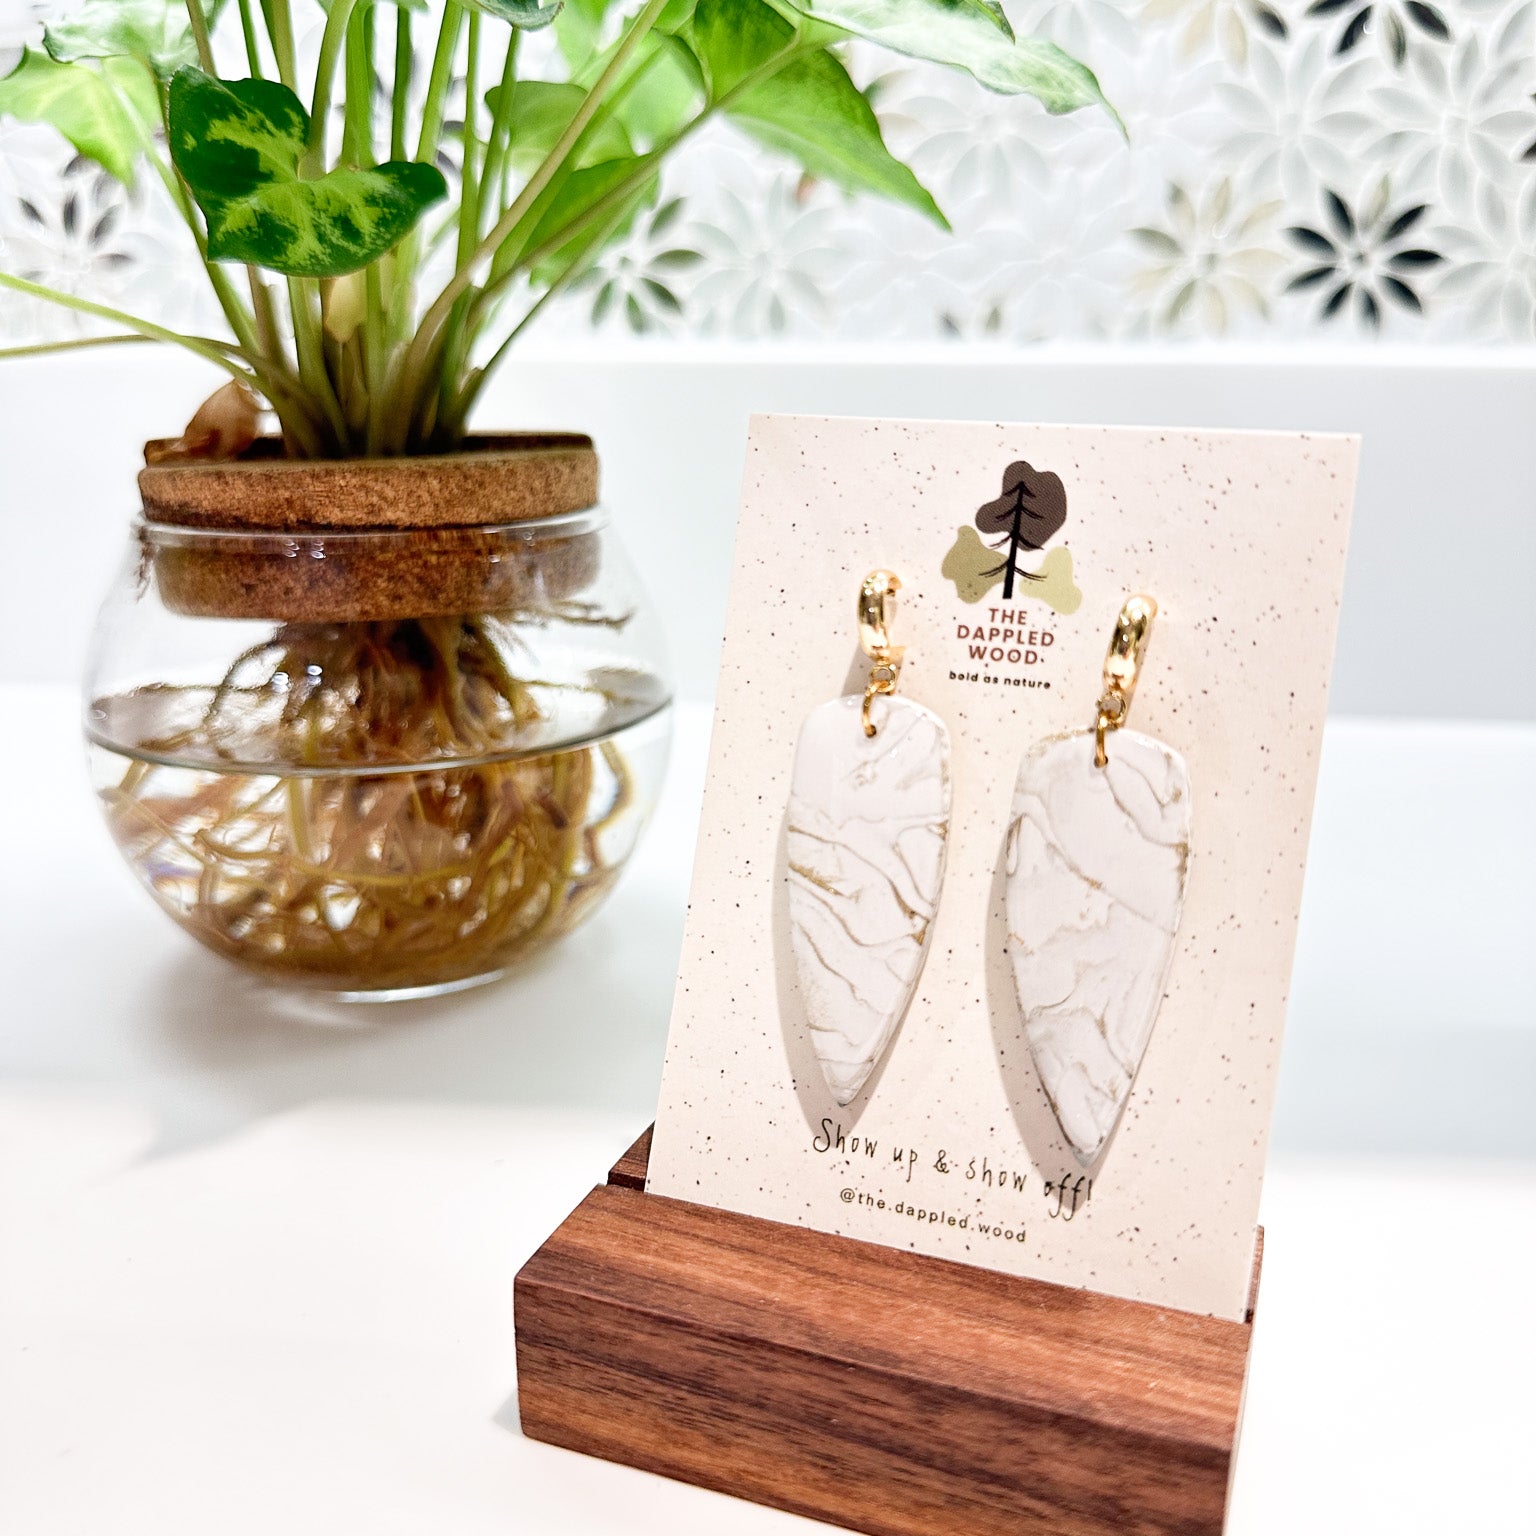 Handcrafted white marble-textured dagger earrings with gold hoops from The Dappled Wood displayed on a wooden stand with a green plant backdrop.